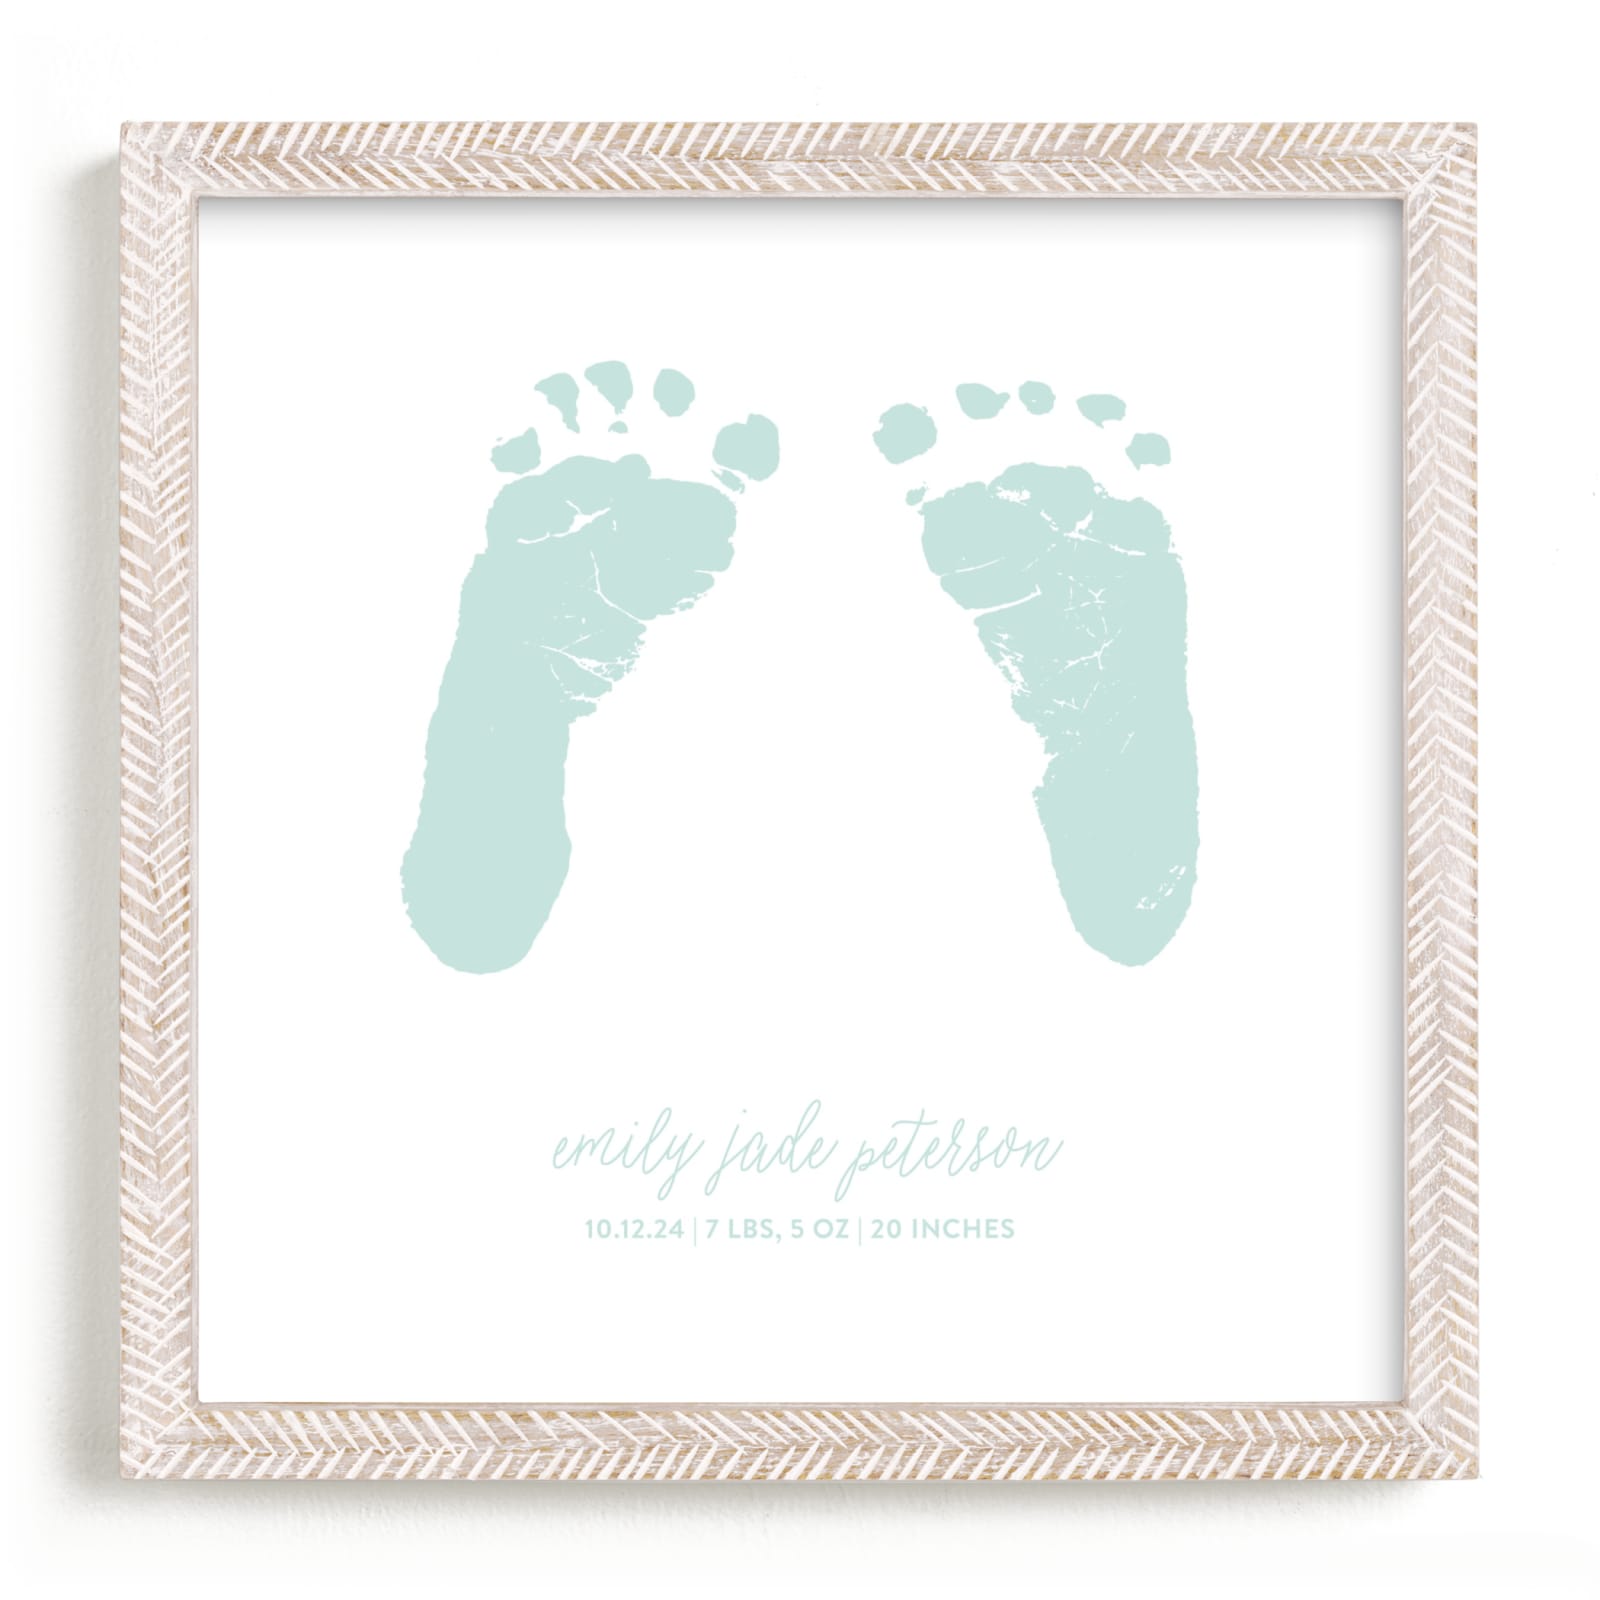 "Custom Footprints Letterpress Art" - Completely Custom Letterpress Art by Minted in beautiful frame options and a variety of sizes.